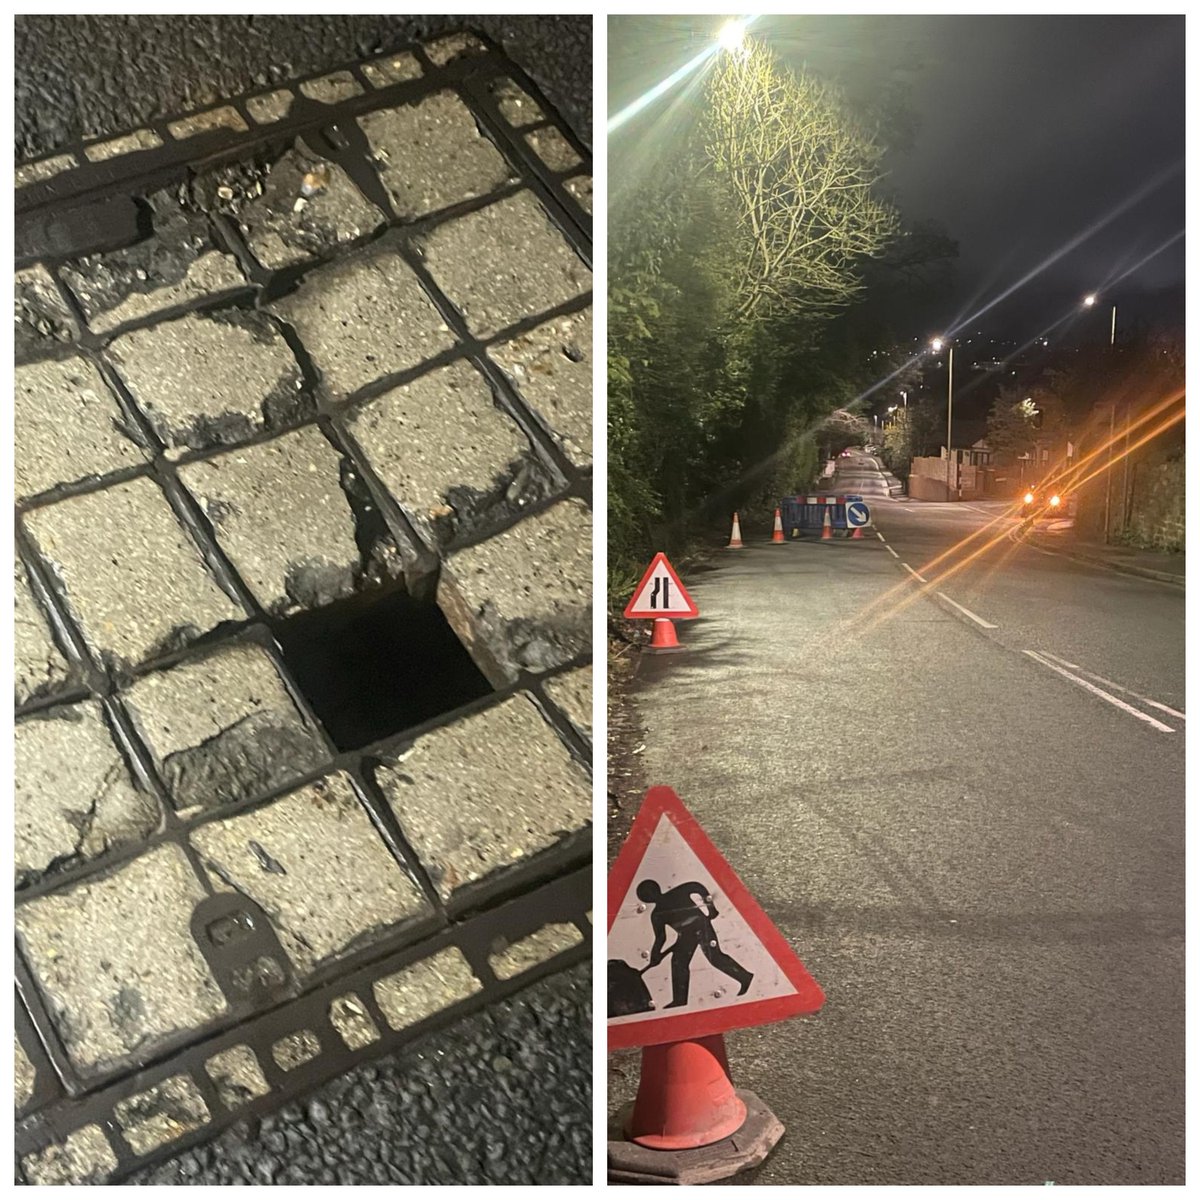 If you're using Kinghill Road this morning, please be aware of the warning signage close to the roundabout travelling down the hill from Bath Road and Okus Road, due to a damaged Thames Water manhole cover